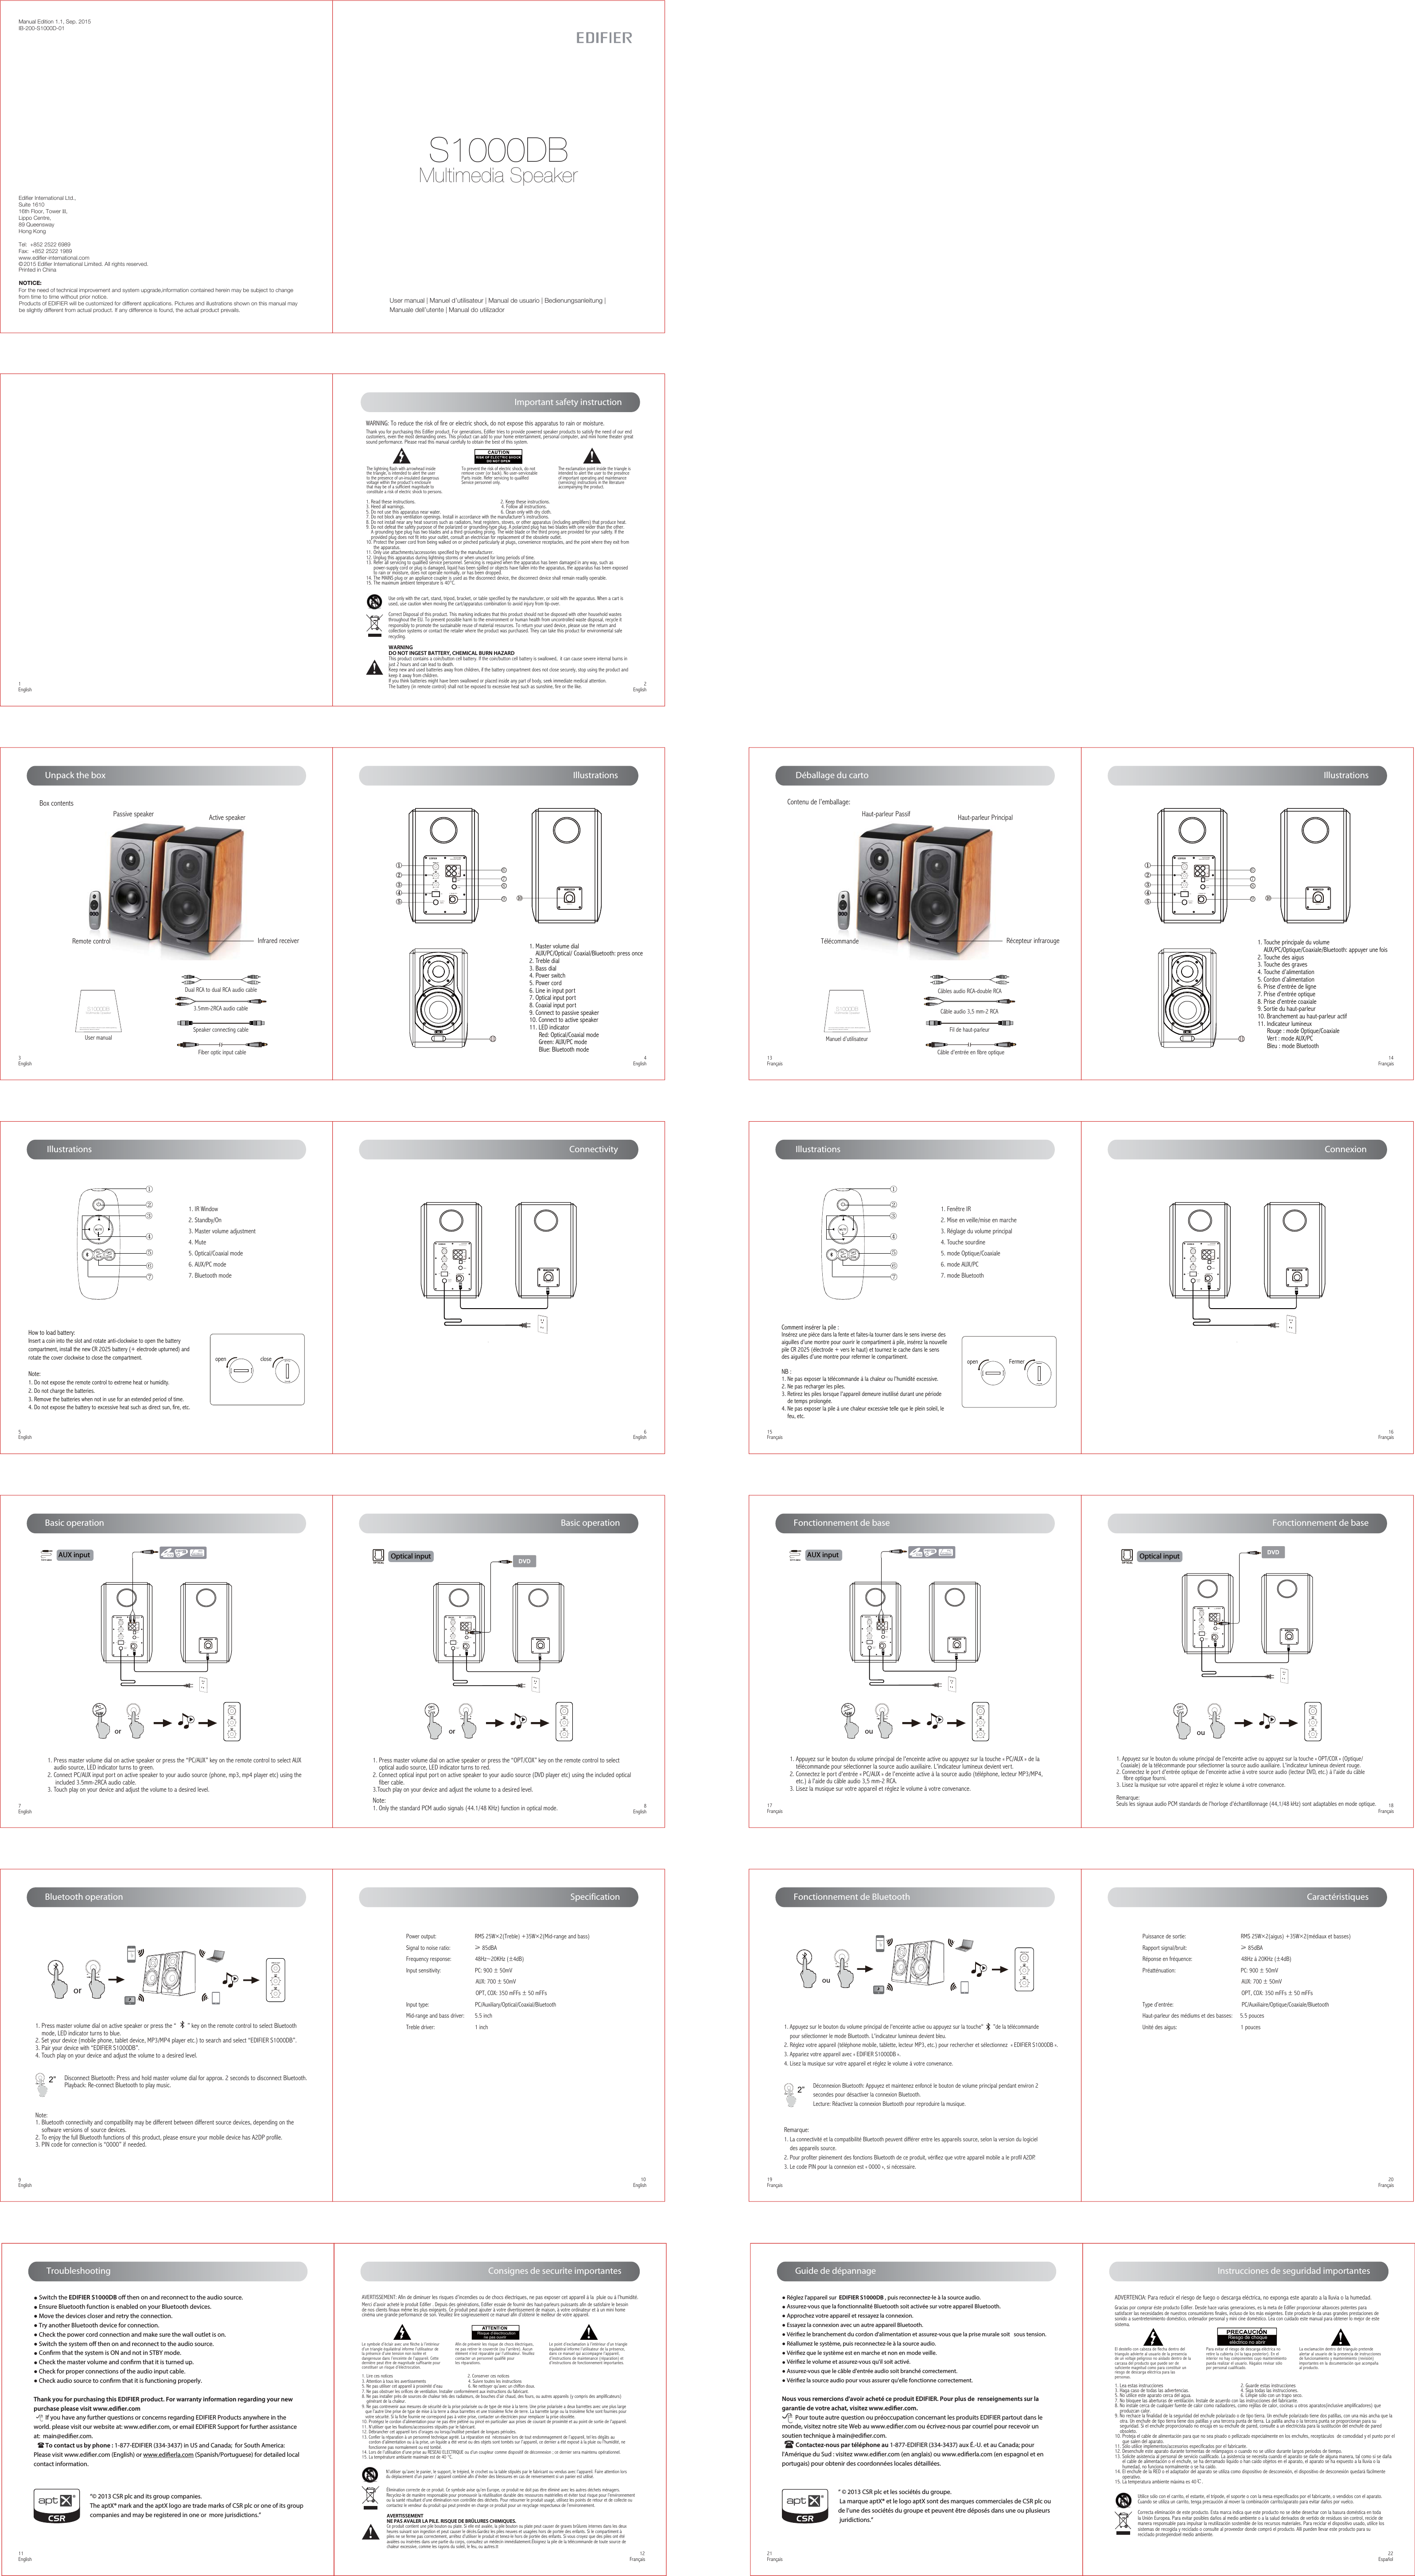 Manual Edition 1.1, Sep. 2015IB-200-S1000D-01Products of EDIFIER will be customized for different applications. Pictures and illustrations shown on this manual maybe slightly different from actual product. If any difference is found, the actual product prevails.NOTICE:For the need of technical improvement and system upgrade,information contained herein may be subject to change from time to time without prior notice.  Printed in China© 2015 Edifier International Limited. All rights reserved.Edifier International Ltd.,Suite 161016th Floor, Tower II,Lippo Centre,89 QueenswayHong KongTel:  +852 2522 6989Fax:  +852 2522 1989www.edifier-international.comUser manual | Manuel d’utilisateur | Manual de usuario | Bedienungsanleitung | Manuale dell’utente | Manual do utilizadorS1000DBMultimedia Speaker1EnglishTo prevent the risk of electric shock, do not remove cover (or back). No user-serviceable Parts inside. Refer servicing to qualified Service personnel only. The exclamation point inside the triangle is intended to alert the user to the presence of important operating and maintenance(servicing) instructions in the literature accompanying the product.Important safety instruction2EnglishThank you for purchasing this Edifier product. For generations, Edifier tries to provide powered speaker products to satisfy the need of our end customers, even the most demanding ones. This product can add to your home entertainment, personal computer, and mini home theater great sound performance. Please read this manual carefully to obtain the best of this system.The lightning flash with arrowhead inside the triangle, is intended to alert the user to the presence of un-insulated dangerous voltage within the product&apos;s enclosure that may be of a sufficient magnitude toconstitute a risk of electric shock to persons.1. Read these instructions.                                                                   2. Keep these instructions.3. Heed all warnings.                                                                            4. Follow all instructions.5. Do not use this apparatus near water.                                               6. Clean only with dry cloth.7. Do not block any ventilation openings. Install in accordance with the manufacturer’s instructions.8. Do not install near any heat sources such as radiators, heat registers, stoves, or other apparatus (including amplifiers) that produce heat.9. Do not defeat the safety purpose of the polarized or grounding-type plug. A polarized plug has two blades with one wider than the other.     A grounding type plug has two blades and a third grounding prong. The wide blade or the third prong are provided for your safety. If the     provided plug does not fit into your outlet, consult an electrician for replacement of the obsolete outlet.10. Protect the power cord from being walked on or pinched particularly at plugs, convenience receptacles, and the point where they exit from       the apparatus.11. Only use attachments/accessories specified by the manufacturer.12. Unplug this apparatus during lightning storms or when unused for long periods of time.13. Refer all servicing to qualified service personnel. Servicing is required when the apparatus has been damaged in any way, such as       power-supply cord or plug is damaged, liquid has been spilled or objects have fallen into the apparatus, the apparatus has been exposed       to rain or moisture, does not operate normally, or has been dropped.14. The MAINS plug or an appliance coupler is used as the disconnect device, the disconnect device shall remain readily operable.15. The maximum ambient temperature is 40°C.WARNING: To reduce the risk of fire or electric shock, do not expose this apparatus to rain or moisture.Correct Disposal of this product. This marking indicates that this product should not be disposed with other household wastes throughout the EU. To prevent possible harm to the environment or human health from uncontrolled waste disposal, recycle it responsibly to promote the sustainable reuse of material resources. To return your used device, please use the return and collection systems or contact the retailer where the product was purchased. They can take this product for environmental safe recycling.Use only with the cart, stand, tripod, bracket, or table specified by the manufacturer, or sold with the apparatus. When a cart is used, use caution when moving the cart/apparatus combination to avoid injury from tip-over. WARNINGDO NOT INGEST BATTERY, CHEMICAL BURN HAZARDThis product contains a coin/button cell battery. If the coin/button cell battery is swallowed,  it can cause severe internal burns in just 2 hours and can lead to death.Keep new and used batteries away from children, if the battery compartment does not close securely, stop using the product and keep it away from children.If you think batteries might have been swallowed or placed inside any part of body, seek immediate medical attention.The battery (in remote control) shall not be exposed to excessive heat such as sunshine, fire or the like.Unpack the box Box contents3EnglishIllustrations 4English Illustrations5English 6English7English 8English9English       10EnglishPassive speaker Active speakerInfrared receiverRemote controlDual RCA to dual RCA audio cable3.5mm-2RCA audio cableSpeaker connecting cableFiber optic input cableUser manual | Manuel d’utilisateur | Manual de usuario | Bedienungsanleitung | Manuale dell’utente | Manual do utilizadorS1000DBMultimedia SpeakerUser manual1. Master volume dial    AUX/PC/Optical/ Coaxial/Bluetooth: press once2. Treble dial 3. Bass dial4. Power switch5. Power cord6. Line in input port7. Optical input port8. Coaxial input port9. Connect to passive speaker10. Connect to active speaker11. LED indicator      Red: Optical/Coaxial mode      Green: AUX/PC mode      Blue: Bluetooth mode②③ ④① ⑥⑤⑦1. IR Window2. Standby/On3. Master volume adjustment4. Mute5. Optical/Coaxial mode6. AUX/PC mode7. Bluetooth modeConnectivity Basic operation Basic operation1. Press master volume dial on active speaker or press the “PC/AUX” key on the remote control to select AUX    audio source, LED indicator turns to green.2. Connect PC/AUX input port on active speaker to your audio source (phone, mp3, mp4 player etc) using the     included 3.5mm-2RCA audio cable.3. Touch play on your device and adjust the volume to a desired level.1. Press master volume dial on active speaker or press the “       ” key on the remote control to select Bluetooth    mode, LED indicator turns to blue.2. Set your device (mobile phone, tablet device, MP3/MP4 player etc.) to search and select “EDIFIER S1000DB”.3. Pair your device with “EDIFIER S1000DB”.4. Touch play on your device and adjust the volume to a desired level.Note:1. Bluetooth connectivity and compatibility may be different between different source devices, depending on the    software versions of source devices.2. To enjoy the full Bluetooth functions of this product, please ensure your mobile device has A2DP profile.3. PIN code for connection is “0000” if needed.1. Press master volume dial on active speaker or press the “OPT/COX” key on the remote control to select    optical audio source, LED indicator turns to red.2. Connect optical input port on active speaker to your audio source (DVD player etc) using the included optical     fiber cable.3.Touch play on your device and adjust the volume to a desired level.Note: 1. Only the standard PCM audio signals (44.1/48 KHz) function in optical mode.Bluetooth operationDisconnect Bluetooth: Press and hold master volume dial for approx. 2 seconds to disconnect Bluetooth.Playback: Re-connect Bluetooth to play music.SpecificationPower output:                          RMS 25W×2(Treble) +35W×2(Mid-range and bass) Signal to noise ratio:                ≥ 85dBAFrequency response:                48Hz~20KHz (±4dB)Input sensitivity:                       PC: 900 ± 50mV                                                AUX: 700 ± 50mV                                               OPT, COX: 350 mFFs ± 50 mFFs Input type:                               PC/Auxiliary/Optical/Coaxial/BluetoothMid-range and bass driver:       5.5 inchTreble driver:                           1 inchAUX input  Optical inputHow to load battery:Insert a coin into the slot and rotate anti-clockwise to open the battery compartment, install the new CR 2025 battery (+ electrode upturned) and rotate the cover clockwise to close the compartment.Note:1. Do not expose the remote control to extreme heat or humidity.2. Do not charge the batteries.3. Remove the batteries when not in use for an extended period of time.4. Do not expose the battery to excessive heat such as direct sun, fire, etc.open close11English         12Français ● Switch the EDIFIER S1000DB o then on and reconnect to the audio source. ● Ensure Bluetooth function is enabled on your Bluetooth devices.● Move the devices closer and retry the connection. ● Try another Bluetooth device for connection.● Check the power cord connection and make sure the wall outlet is on. ● Switch the system o then on and reconnect to the audio source.● Conrm that the system is ON and not in STBY mode.● Check the master volume and conrm that it is turned up.● Check for proper connections of the audio input cable.● Check audio source to conrm that it is functioning properly.Thank you for purchasing this EDIFIER product. For warranty information regarding your new purchase please visit www.edier.com        If you have any further questions or concerns regarding EDIFIER Products anywhere in the world. please visit our website at: www.ediﬁer.com, or email EDIFIER Support for further assistance at:  main@ediﬁer.com.        To contact us by phone : 1-877-EDIFIER (334-3437) in US and Canada;  for South America: Please visit www.ediﬁer.com (English) or www.ediﬁerla.com (Spanish/Portuguese) for detailed local contact information.TroubleshootingAVERTISSEMENT: Afin de diminuer les risques d’incendies ou de chocs électriques, ne pas exposer cet appareil à la  pluie ou à l’humidité.Le point d’exclamation à l’intérieur d’un triangle équilatéral informe l’utilisateur de la présence, dans ce manuel qui accompagne l’appareil, d’instructions de maintenance (réparation) et d’instructions de fonctionnement importantes.Afin de prévenir les risque de chocs électriques, ne pas retirer le couvercle (ou l’arrière). Aucun élément n’est réparable par l’utilisateur. Veuillez contacter un personnel qualifié pour les réparations. Risque d’électrocution       ne pas ouvrirMerci d’avoir acheté le produit Edifier . Depuis des générations, Edifier essaie de fournir des haut-parleurs puissants afin de satisfaire le besoinde nos clients finaux même les plus exigeants. Ce produit peut ajouter à votre divertissement de maison, à votre ordinateur et à un mini homecinéma une grande performance de son. Veuillez lire soigneusement ce manuel afin d’obtenir le meilleur de votre appareil.Le symbole d’éclair avec une flèche à l’intérieur d’un triangle équilatéral informe l’utilisateur de la présence d’une tension non isolée et dangereuse dans l’enceinte de l’appareil. Cette dernière peut être de magnitude suffisante pour constituer un risque d’électrocution.  1. Lire ces notices                                                                2. Conserver ces notices3. Attention à tous les avertissements                                    4. Suivre toutes les instructions5. Ne pas utiliser cet appareil à proximité d’eau                      6. Ne nettoyer qu’avec un chiffon doux.7. Ne pas obstruer les orifices de ventilation. Installer conformément aux instructions du fabricant.8. Ne pas installer près de sources de chaleur tels des radiateurs, de bouches d’air chaud, des fours, ou autres appareils (y compris des amplificateurs)    générant de la chaleur.9. Ne pas contrevenir aux mesures de sécurité de la prise polarisée ou de type de mise à la terre. Une prise polarisée a deux barrettes avec une plus large    que l’autre Une prise de type de mise à la terre a deux barrettes et une troisième fiche de terre. La barrette large ou la troisième fiche sont fournies pour   votre sécurité. Si la fiche fournie ne correspond pas à votre prise, contacter un électricien pour remplacer la prise obsolète.10. Protégez le cordon d’alimentation pour ne pas être piétiné ou pincé en particulier aux prises de courant de proximité et au point de sortie de l&apos;appareil.11. N’utiliser que les fixations/accessoires stipulés par le fabricant.12. Débrancher cet appareil lors d’orages ou lorsqu’inutilisé pendant de longues périodes.13. Confier la réparation à un personnel technique agréé. La réparation est  nécessaire lors de tout endommagement de l’appareil, tel les dégâts au       cordon d’alimentation ou à la prise, un liquide a été versé ou des objets sont tombés sur l’appareil, ce dernier a été exposé à la pluie ou l’humidité, ne       fonctionne pas normalement ou est tombé. 14. Lors de l’utilisation d’une prise au RESEAU ELECTRIQUE ou d’un coupleur comme dispositif de déconnexion ; ce dernier sera maintenu opérationnel.15. La température ambiante maximale est de 40 °C.Élimination correcte de ce produit. Ce symbole avise qu’en Europe, ce produit ne doit pas être éliminé avec les autres déchets ménagers.Recyclez-le de manière responsable pour promouvoir la réutilisation durable des ressources matérielles et éviter tout risque pour l’environnementou la santé résultant d’une élimination non contrôlée des déchets. Pour retourner le produit usagé, utilisez les points de retour et de collecte oucontactez le vendeur du produit qui peut prendre en charge ce produit pour un recyclage respectueux de l’environnement.N’utiliser qu’avec le panier, le support, le trépied, le crochet ou la table stipulés par le fabricant ou vendus avec l’appareil. Faire attention lors du déplacement d’un panier / appareil combiné afin d’éviter des blessures en cas de renversement si un panier est utilisé. AVERTISSEMENTNE PAS AVALER LA PILE. RISQUE DE BRÛLURES CHIMIQUES.Ce produit contient une pile bouton ou plate. Si elle est avalée, la pile bouton ou plate peut causer de graves brûlures internes dans les deuxheures suivant son ingestion et peut causer le décès.Gardez les piles neuves et usagées hors de portée des enfants. Si le compartiment àpiles ne se ferme pas correctement, arrêtez d&apos;utiliser le produit et tenez-le hors de portée des enfants. Si vous croyez que des piles ont été avalées ou insérées dans une partie du corps, consultez un médecin immédiatement.Éloignez la pile de la télécommande de toute source dechaleur excessive, comme les rayons du soleil, le feu, ou autres.ttConsignes de securite importantes1111Multimedia Speaker S1000DBSpeaker InPowerOff OnL  Speaker OutOPTCOX6789100-240V  50/60Hz 400mAPCAUX②①③④⑤⑩Multimedia Speaker S1000DBSpeaker InPowerOff OnL  Speaker OutOPTCOX100-240V  50/60Hz 400mAPCAUXMultimedia Speaker S1000DBSpeaker InPowerOff OnL  Speaker OutOPTCOX100-240V  50/60Hz 400mAPCAUXorEDIFIER S1000or2”        14Français 13Français         16Français 15Français         18Français 17Français         20Français 19Français Haut-parleur Passif Haut-parleur PrincipalRécepteur infrarougeTélécommandeCâble audio 3,5 mm-2 RCACâbles audio RCA-double RCAFil de haut-parleurCâble d&apos;entrée en fibre optiqueUser manual | Manuel d’utilisateur | Manual de usuario | Bedienungsanleitung | Manuale dell’utente | Manual do utilizadorS1000DBMultimedia Speaker1. Touche principale du volume     AUX/PC/Optique/Coaxiale/Bluetooth: appuyer une fois2. Touche des aigus 3. Touche des graves 4. Touche d’alimentation5. Cordon d’alimentation6. Prise d&apos;entrée de ligne7. Prise d&apos;entrée optique8. Prise d&apos;entrée coaxiale9. Sortie du haut-parleur10. Branchement au haut-parleur actif 11. Indicateur lumineux      Rouge : mode Optique/Coaxiale      Vert : mode AUX/PC      Bleu : mode Bluetooth②③ ④① ⑥⑤⑦1. Fenêtre IR2. Mise en veille/mise en marche3. Réglage du volume principal4. Touche sourdine5. mode Optique/Coaxiale 6. mode AUX/PC 7. mode Bluetooth1. Appuyez sur le bouton du volume principal de l&apos;enceinte active ou appuyez sur la touche « PC/AUX » de la    télécommande pour sélectionner la source audio auxiliaire. L&apos;indicateur lumineux devient vert.2. Connectez le port d&apos;entrée « PC/AUX » de l&apos;enceinte active à la source audio (téléphone, lecteur MP3/MP4,    etc.) à l&apos;aide du câble audio 3,5 mm-2 RCA.3. Lisez la musique sur votre appareil et réglez le volume à votre convenance.1. Appuyez sur le bouton du volume principal de l&apos;enceinte active ou appuyez sur la touche « OPT/COX » (Optique/   Coaxiale) de la télécommande pour sélectionner la source audio auxiliaire. L&apos;indicateur lumineux devient rouge.2. Connectez le port d&apos;entrée optique de l&apos;enceinte active à votre source audio (lecteur DVD, etc.) à l&apos;aide du câble     fibre optique fourni.3. Lisez la musique sur votre appareil et réglez le volume à votre convenance.Remarque: Seuls les signaux audio PCM standards de l&apos;horloge d&apos;échantillonnage (44,1/48 kHz) sont adaptables en mode optique.1. Appuyez sur le bouton du volume principal de l&apos;enceinte active ou appuyez sur la touche“      ”de la télécommande     pour sélectionner le mode Bluetooth. L&apos;indicateur lumineux devient bleu.2. Réglez votre appareil (téléphone mobile, tablette, lecteur MP3, etc.) pour rechercher et sélectionnez  « EDIFIER S1000DB ».3. Appariez votre appareil avec « EDIFIER S1000DB ».4. Lisez la musique sur votre appareil et réglez le volume à votre convenance.Remarque:1. La connectivité et la compatibilité Bluetooth peuvent différer entre les appareils source, selon la version du logiciel     des appareils source.2. Pour profiter pleinement des fonctions Bluetooth de ce produit, vérifiez que votre appareil mobile a le profil A2DP.3. Le code PIN pour la connexion est « 0000 », si nécessaire.Déconnexion Bluetooth: Appuyez et maintenez enfoncé le bouton de volume principal pendant environ 2 secondes pour désactiver la connexion Bluetooth.Lecture: Réactivez la connexion Bluetooth pour reproduire la musique.Puissance de sortie:                                     RMS 25W×2(aigus) +35W×2(médiaux et basses) Rapport signal/bruit:                                    ≥ 85dBARéponse en fréquence:                                 48Hz à 20KHz (±4dB)Préatténuation:                                            PC: 900 ± 50mV                                                                    AUX: 700 ± 50mV                                                                   OPT, COX: 350 mFFs ± 50 mFFs Type d’entrée:                                              PC/Auxiliaire/Optique/Coaxiale/BluetoothHaut-parleur des médiums et des basses:     5.5 poucesUnité des aigus:                                           1 poucesAUX input  Optical inputComment insérer la pile :Insérez une pièce dans la fente et faites-la tourner dans le sens inverse des aiguilles d’une montre pour ouvrir le compartiment à pile, insérez la nouvelle pile CR 2025 (électrode + vers le haut) et tournez le cache dans le sens des aiguilles d’une montre pour refermer le compartiment.NB :1. Ne pas exposer la télécommande à la chaleur ou l&apos;humidité excessive.2. Ne pas recharger les piles.3. Retirez les piles lorsque l&apos;appareil demeure inutilisé durant une période    de temps prolongée.4. Ne pas exposer la pile à une chaleur excessive telle que le plein soleil, le    feu, etc.open Fermer Déballage du cartoContenu de l’emballage:Manuel d’utilisateur Illustrations Illustrations  Connexion Fonctionnement de base Fonctionnement de baseFonctionnement de Bluetooth  Caractéristiques21Français Guide de dépannage● Réglez l&apos;appareil sur  EDIFIER S1000DB , puis reconnectez-le à la source audio.● Assurez-vous que la fonctionnalité Bluetooth soit activée sur votre appareil Bluetooth.● Approchez votre appareil et ressayez la connexion. ● Essayez la connexion avec un autre appareil Bluetooth.● Vériez le branchement du cordon d&apos;alimentation et assurez-vous que la prise murale soit   sous tension. ● Réallumez le système, puis reconnectez-le à la source audio.● Vériez que le système est en marche et non en mode veille.● Vériez le volume et assurez-vous qu&apos;il soit activé.● Assurez-vous que le câble d&apos;entrée audio soit branché correctement.● Vériez la source audio pour vous assurer qu&apos;elle fonctionne correctement.Nous vous remercions d&apos;avoir acheté ce produit EDIFIER. Pour plus de  renseignements sur la garantie de votre achat, visitez www.edier.com.          Pour toute autre question ou préoccupation concernant les produits EDIFIER partout dans le monde, visitez notre site Web au www.edier.com ou écrivez-nous par courriel pour recevoir un soutien technique à main@edier.com.          Contactez-nous par téléphone au 1-877-EDIFIER (334-3437) aux É.-U. et au Canada; pour l&apos;Amérique du Sud : visitez www.edier.com (en anglais) ou www.edierla.com (en espagnol et en portugais) pour obtenir des coordonnées locales détaillées.Instrucciones de seguridad importantesADVERTENCIA: Para reducir el riesgo de fuego o descarga eléctrica, no exponga este aparato a la lluvia o la humedad.Gracias por comprar éste producto Edifier. Desde hace varias generaciones, es la meta de Edifier proporcionar altavoces potentes para satisfacer las necesidades de nuestros consumidores finales, incluso de los más exigentes. Este producto le da unas grandes prestaciones de sonido a suentretenimiento doméstico, ordenador personal y mini cine doméstico. Lea con cuidado este manual para obtener lo mejor de este sistema. 1. Lea estas instrucciones                                                             2. Guarde estas instrucciones3. Haga caso de todas las advertencias.                                         4. Siga todas las instrucciones.5. No utilice este aparato cerca del agua.                                       6. Limpie sólo con un trapo seco.7. No bloquee las aberturas de ventilación. Instale de acuerdo con las instrucciones del fabricante.8. No instale cerca de cualquier fuente de calor como radiadores, como rejillas de calor, cocinas u otros aparatos(inclusive amplificadores) que     produzcan calor.9. No rechace la finalidad de la seguridad del enchufe polarizado o de tipo tierra. Un enchufe polarizado tiene dos patillas, con una más ancha que la    otra. Un enchufe de tipo tierra tiene dos patillas y una tercera punta de tierra. La patilla ancha o la tercera punta se proporcionan para su     seguridad. Si el enchufe proporcionado no encaja en su enchufe de pared, consulte a un electricista para la sustitución del enchufe de pared      obsoleto.10. Proteja el cable de alimentación para que no sea pisado o pellizcado especialmente en los enchufes, receptáculos  de comodidad y el punto por el      que salen del aparato.11. Sólo utilice implementos/accesorios especificados por el fabricante.12. Desenchufe este aparato durante tormentas de relámpagos o cuando no se utilice durante largos periodos de tiempo.13. Solicite asistencia al personal de servicio cualificado. La asistencia se necesita cuando el aparato se dañe de alguna manera, tal como si se daña       el cable de alimentación o el enchufe, se ha derramado líquido o han caído objetos en el aparato, el aparato se ha expuesto a la lluvia o la       humedad, no funciona normalmente o se ha caído.14. El enchufe de la RED o el adaptador del aparato se utiliza como dispositivo de desconexión, el dispositivo de desconexión quedará fácilmente       operativo.15. La temperatura ambiente máxima es 40℃.La exclamación dentro del triangulo pretende alertar al usuario de la presencia de instrucciones de funcionamiento y mantenimiento (revisión) importantes en la documentación que acompaña al producto.Para evitar el riesgo de descarga eléctrica no retire la cubierta (ni la tapa posterior). En el interior no hay componentes cuyo mantenimiento pueda realizar el usuario. Hágalos revisar sólo por personal cualificado. Riesgo de choque  eléctrico no abrirEl destello con cabeza de flecha dentro del triangulo advierte al usuario de la presencia de un voltaje peligroso no aislado dentro de la carcasa del producto que puede ser de suficiente magnitud como para constituir un riesgo de descarga eléctrica para las personas.Utilice sólo con el carrito, el estante, el trípode, el soporte o con la mesa especificados por el fabricante, o vendidos con el aparato. Cuando se utiliza un carrito, tenga precaución al mover la combinación carrito/aparato para evitar daños por vuelco.Correcta eliminación de este producto. Esta marca indica que este producto no se debe desechar con la basura doméstica en toda la Unión Europea. Para evitar posibles daños al medio ambiente o a la salud derivados de vertido de residuos sin control, recicle de manera responsable para impulsar la reutilización sostenible de los recursos materiales. Para reciclar el dispositivo usado, utilice los sistemas de recogida y reciclado o consulte al proveedor donde compró el producto. Allí pueden llevar este producto para su reciclado protegiendoel medio ambiente.22EspañolMultimedia Speaker S1000DBSpeaker InPowerOff OnL  Speaker OutOPTCOX100-240V  50/60Hz 400mAPCAUXMultimedia Speaker S1000DBSpeaker InPowerOff OnL  Speaker OutOPTCOX100-240V  50/60Hz 400mAPCAUXMultimedia Speaker S1000DBSpeaker InPowerOff OnL  Speaker OutOPTCOX100-240V  50/60Hz 400mAPCAUXEDIFIER S1000ou2”1111Multimedia Speaker S1000DBSpeaker InPowerOff OnL  Speaker OutOPTCOX6789100-240V  50/60Hz 400mAPCAUX②①③④⑤⑩Multimedia Speaker S1000DBSpeaker InPowerOff OnL  Speaker OutOPTCOX100-240V  50/60Hz 400mAPCAUXor  ou  ou“© 2013 CSR plc and its group companies.The aptX® mark and the aptX logo are trade marks of CSR plc or one of its groupcompanies and may be registered in one or  more jurisdictions.”“ © 2013 CSR plc et les sociétés du groupe. La marque aptX® et le logo aptX sont des marques commerciales de CSR plc ou de l’une des sociétés du groupe et peuvent être déposés dans une ou plusieurs juridictions.”